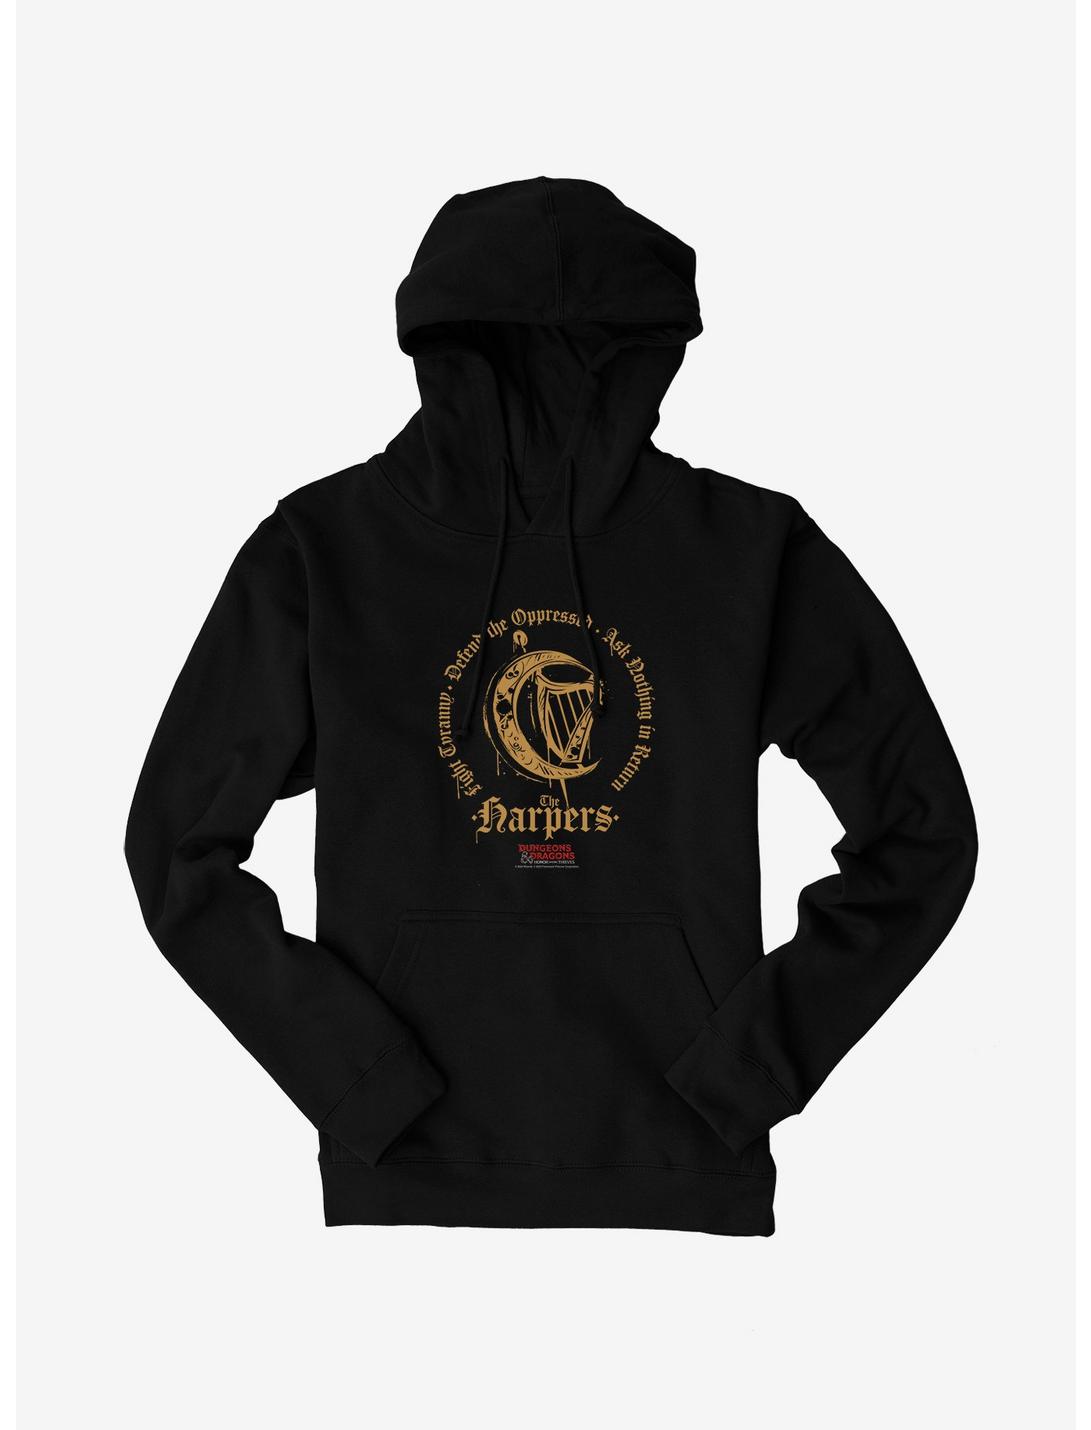 Dungeons & Dragons: Honor Among Thieves The Harpers Organization Hoodie, BLACK, hi-res